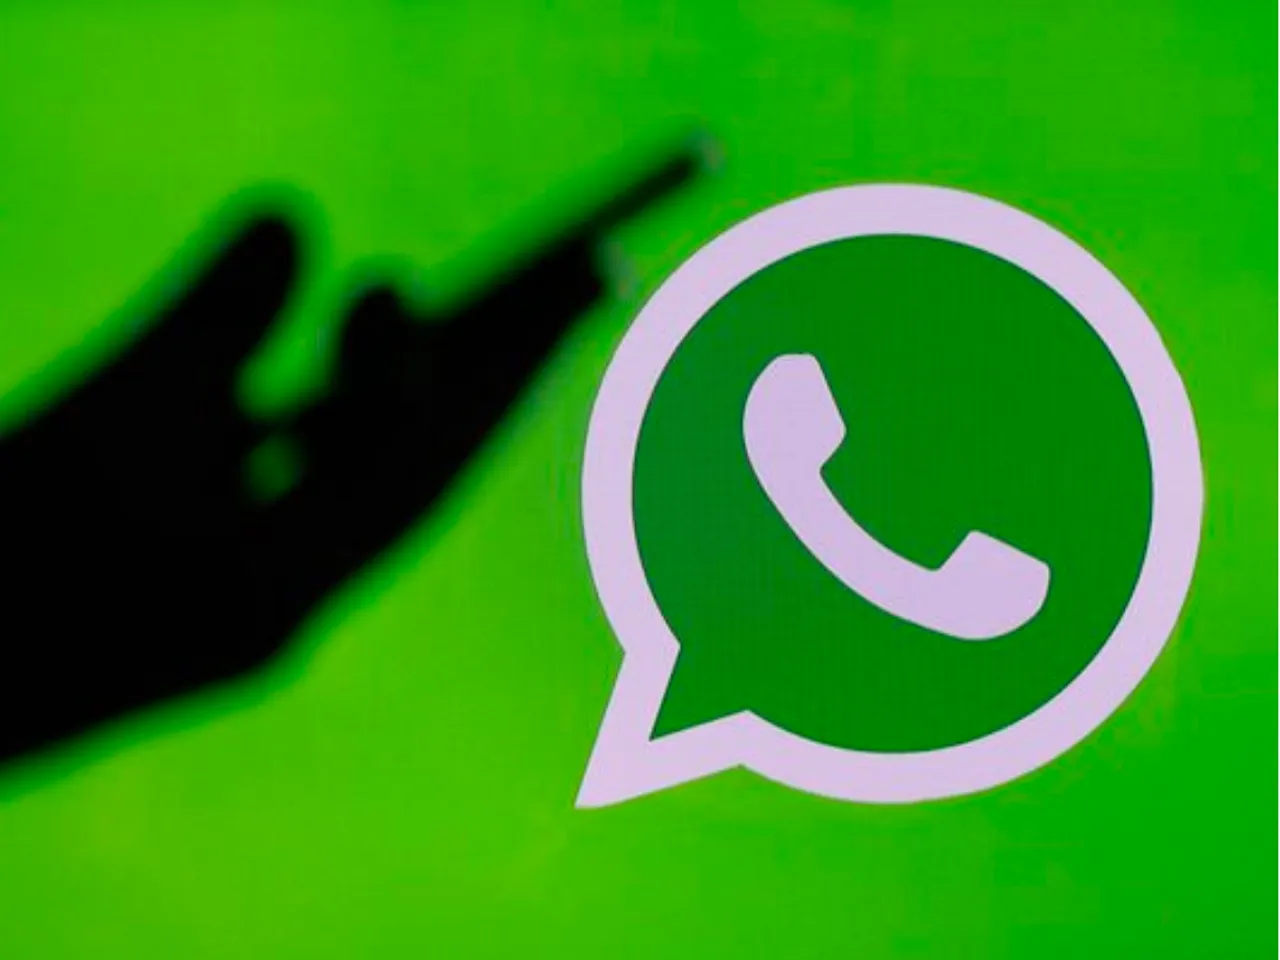 How to delete unwanted WhatsApp media from your Android phone